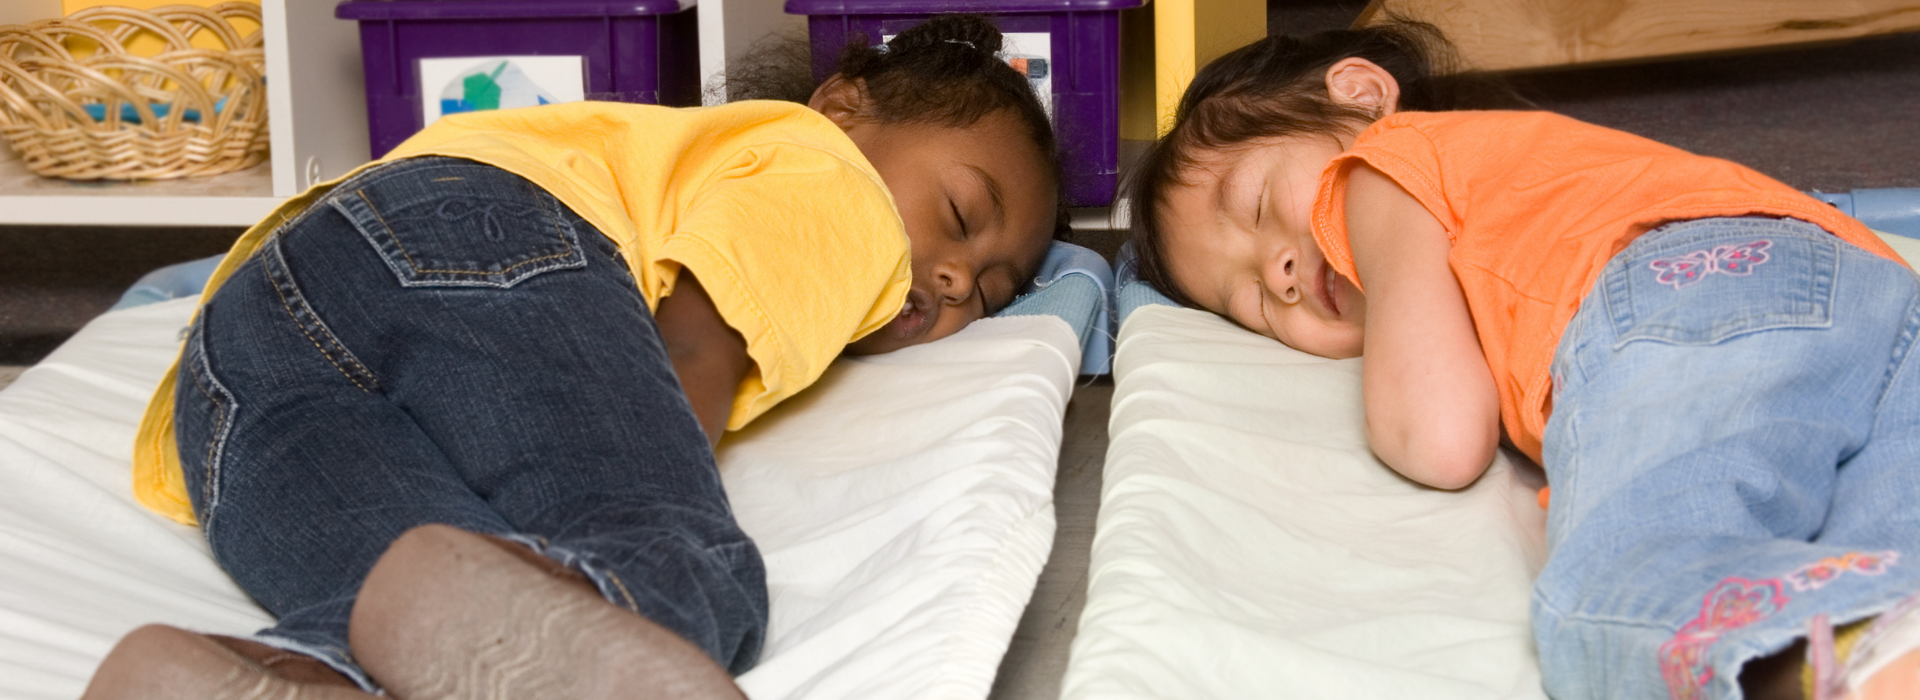 5 Tips for Better Napping at Daycare